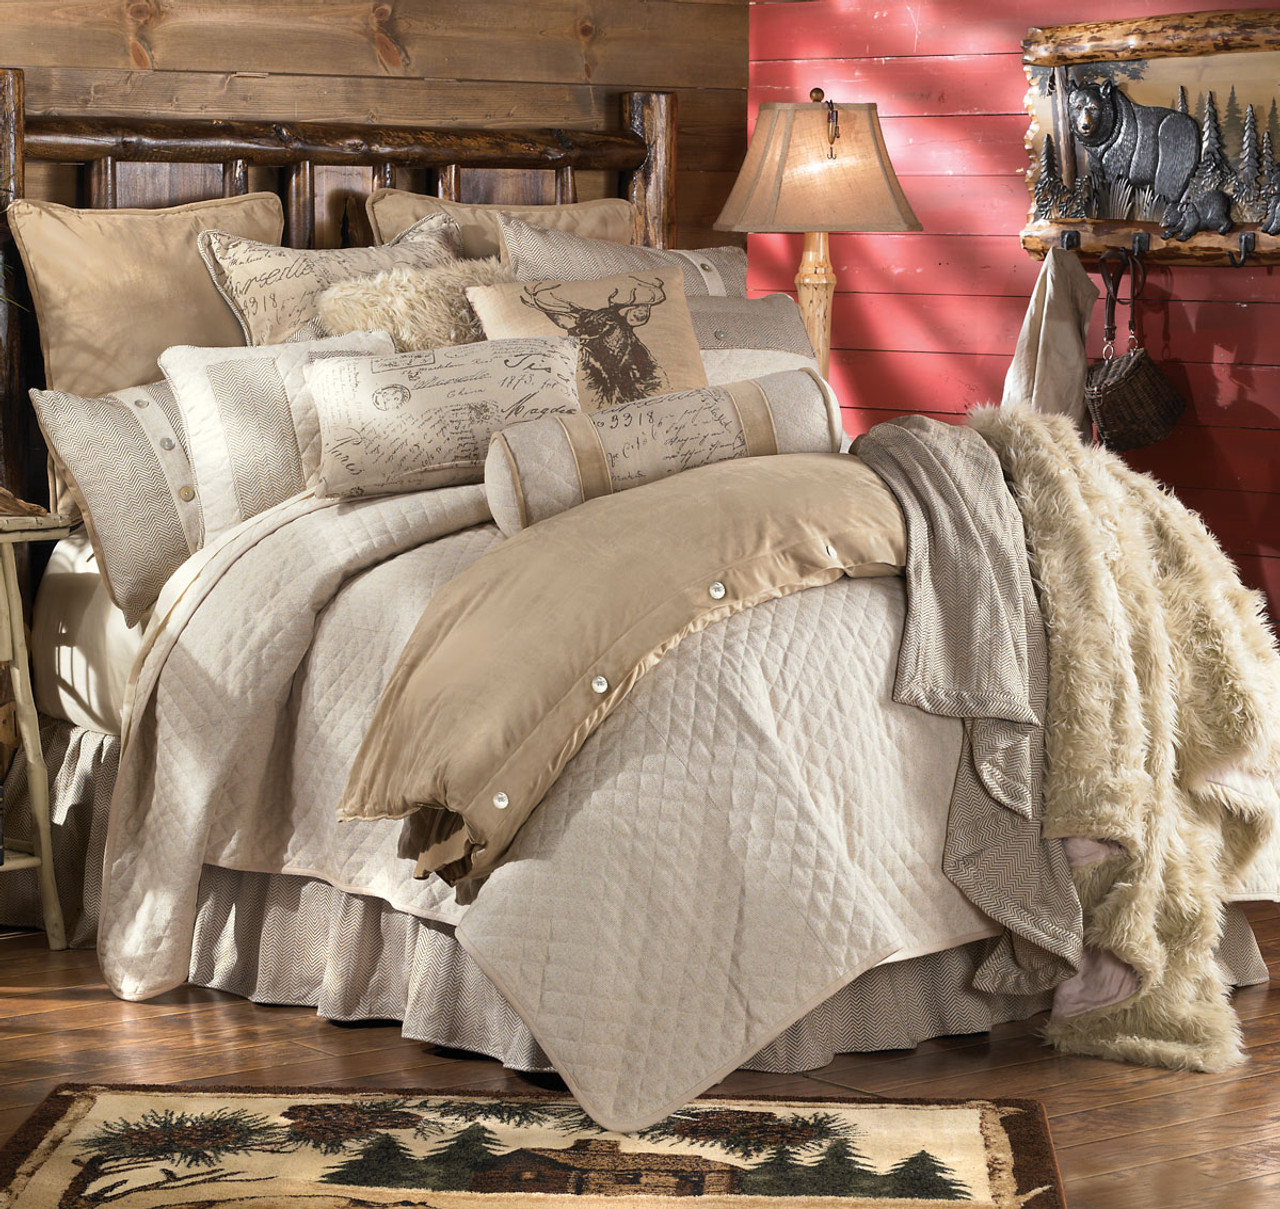 Peri Home 3pc Full/Queen Clipped Honeycomb Comforter Set Light Gray